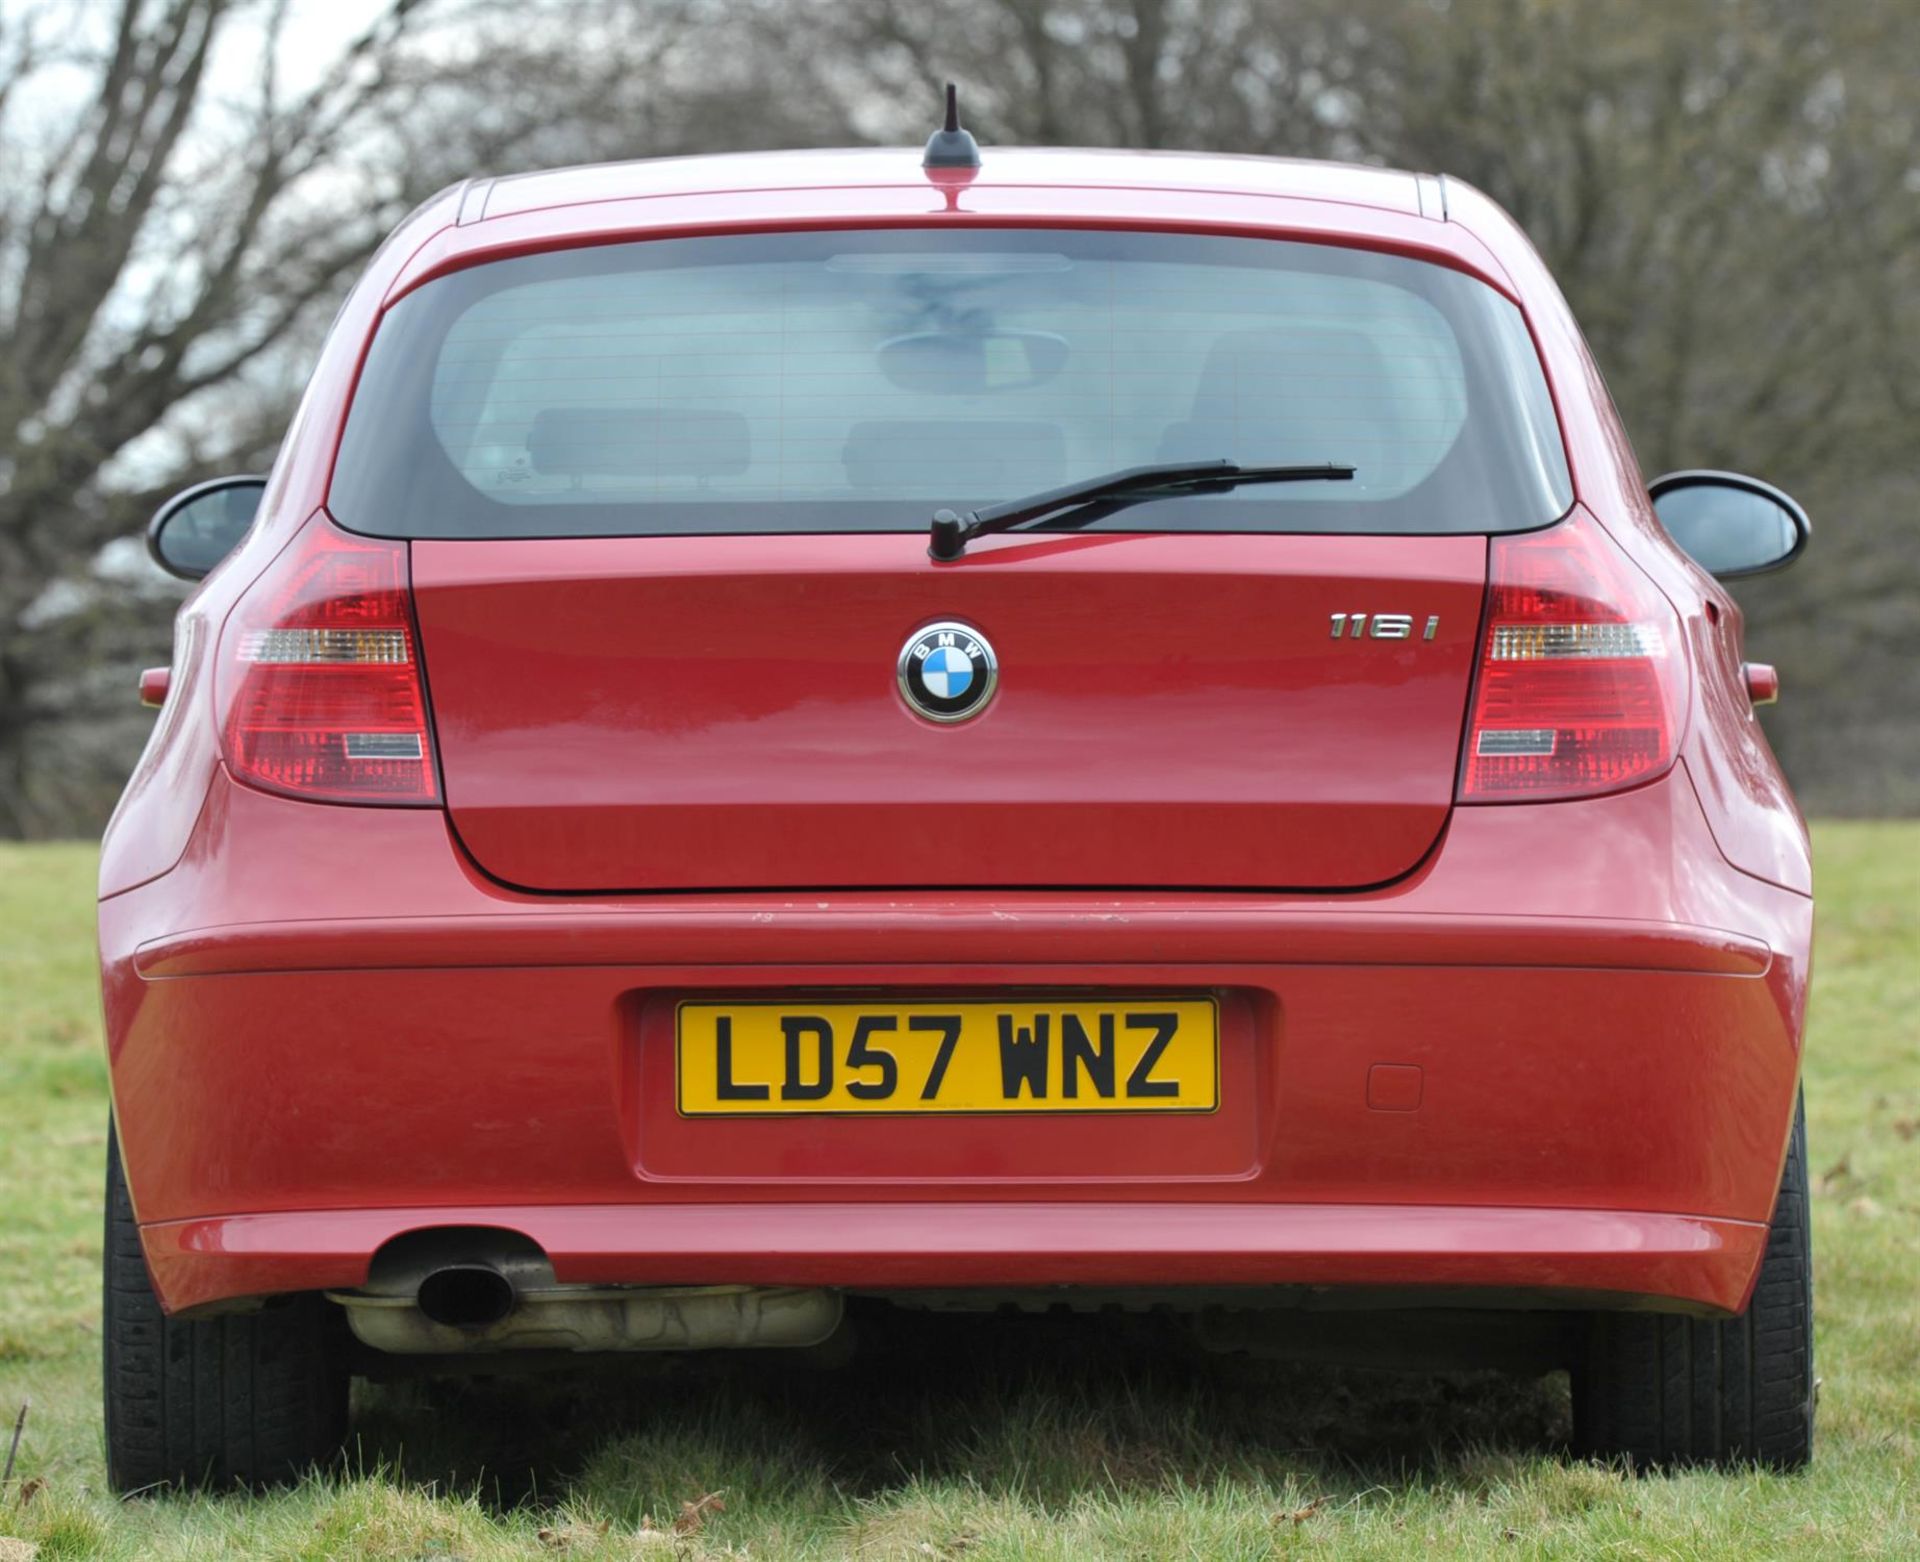 2007 BMW 116i 5 Door in red. Registration number LD57 WNZ - Economical and benefiting from the - Image 10 of 14